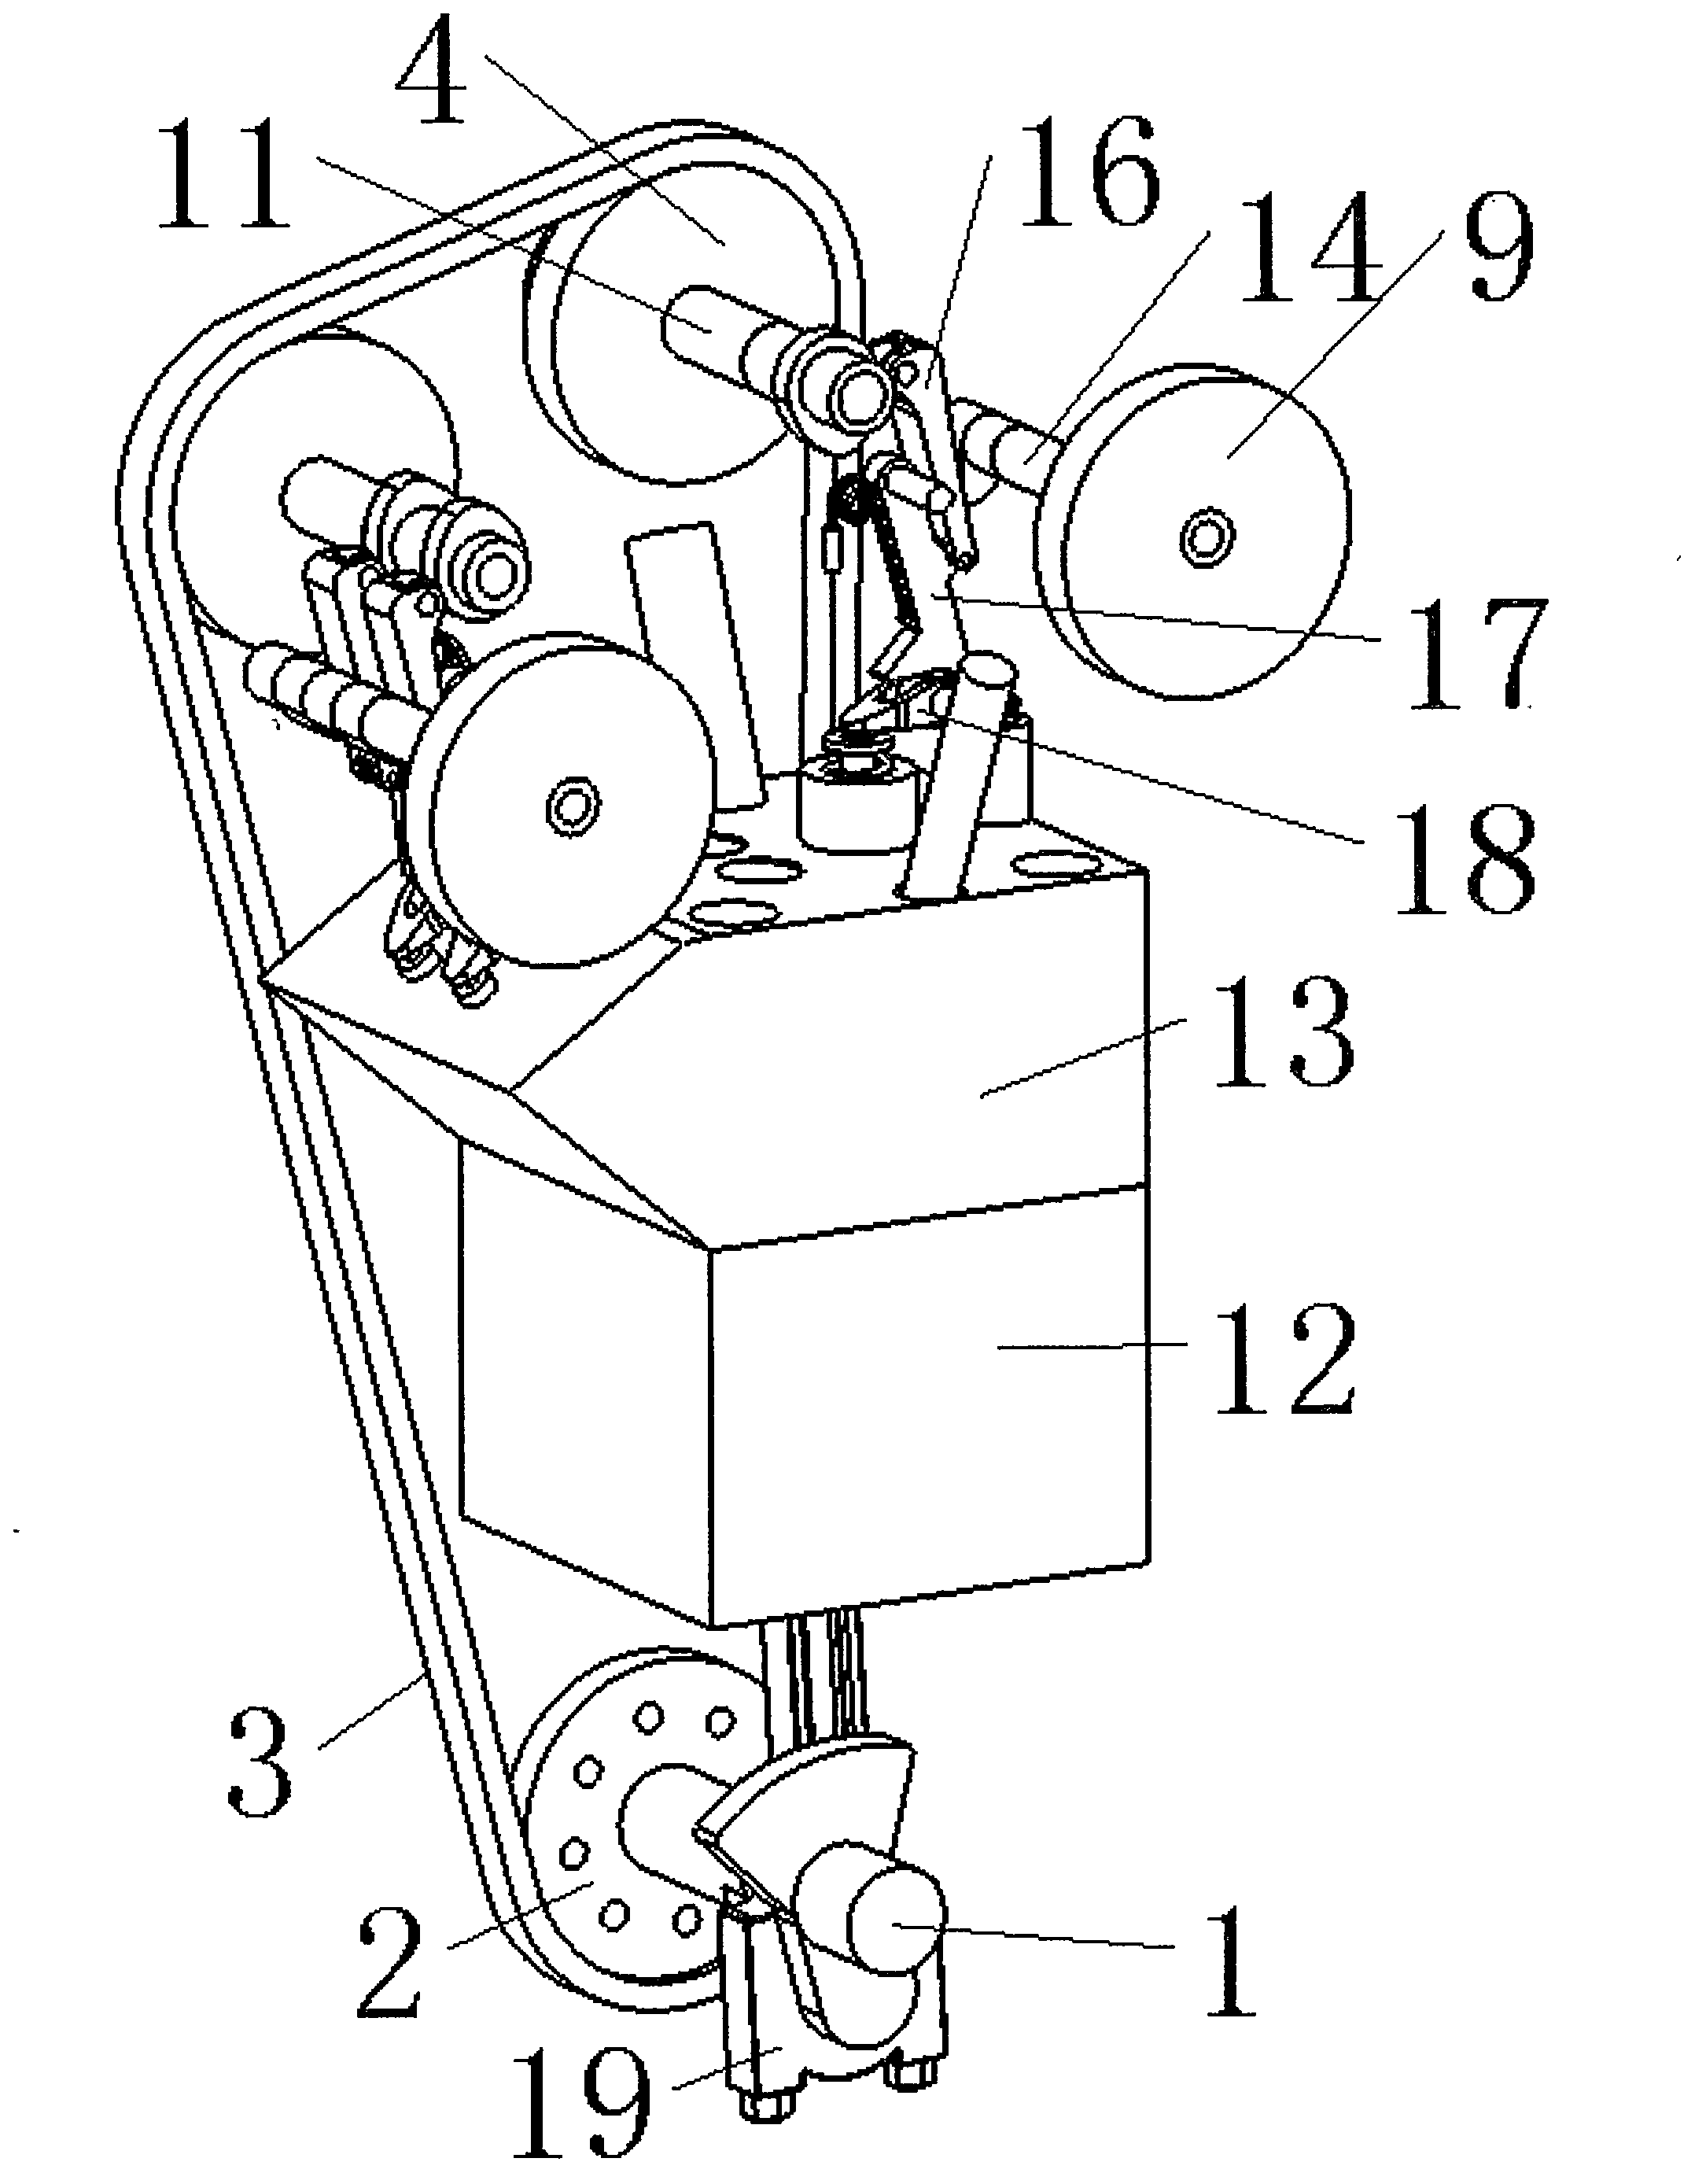 Multi-mode two-stroke atkinson cycle internal-combustion engine with fully overhead valve